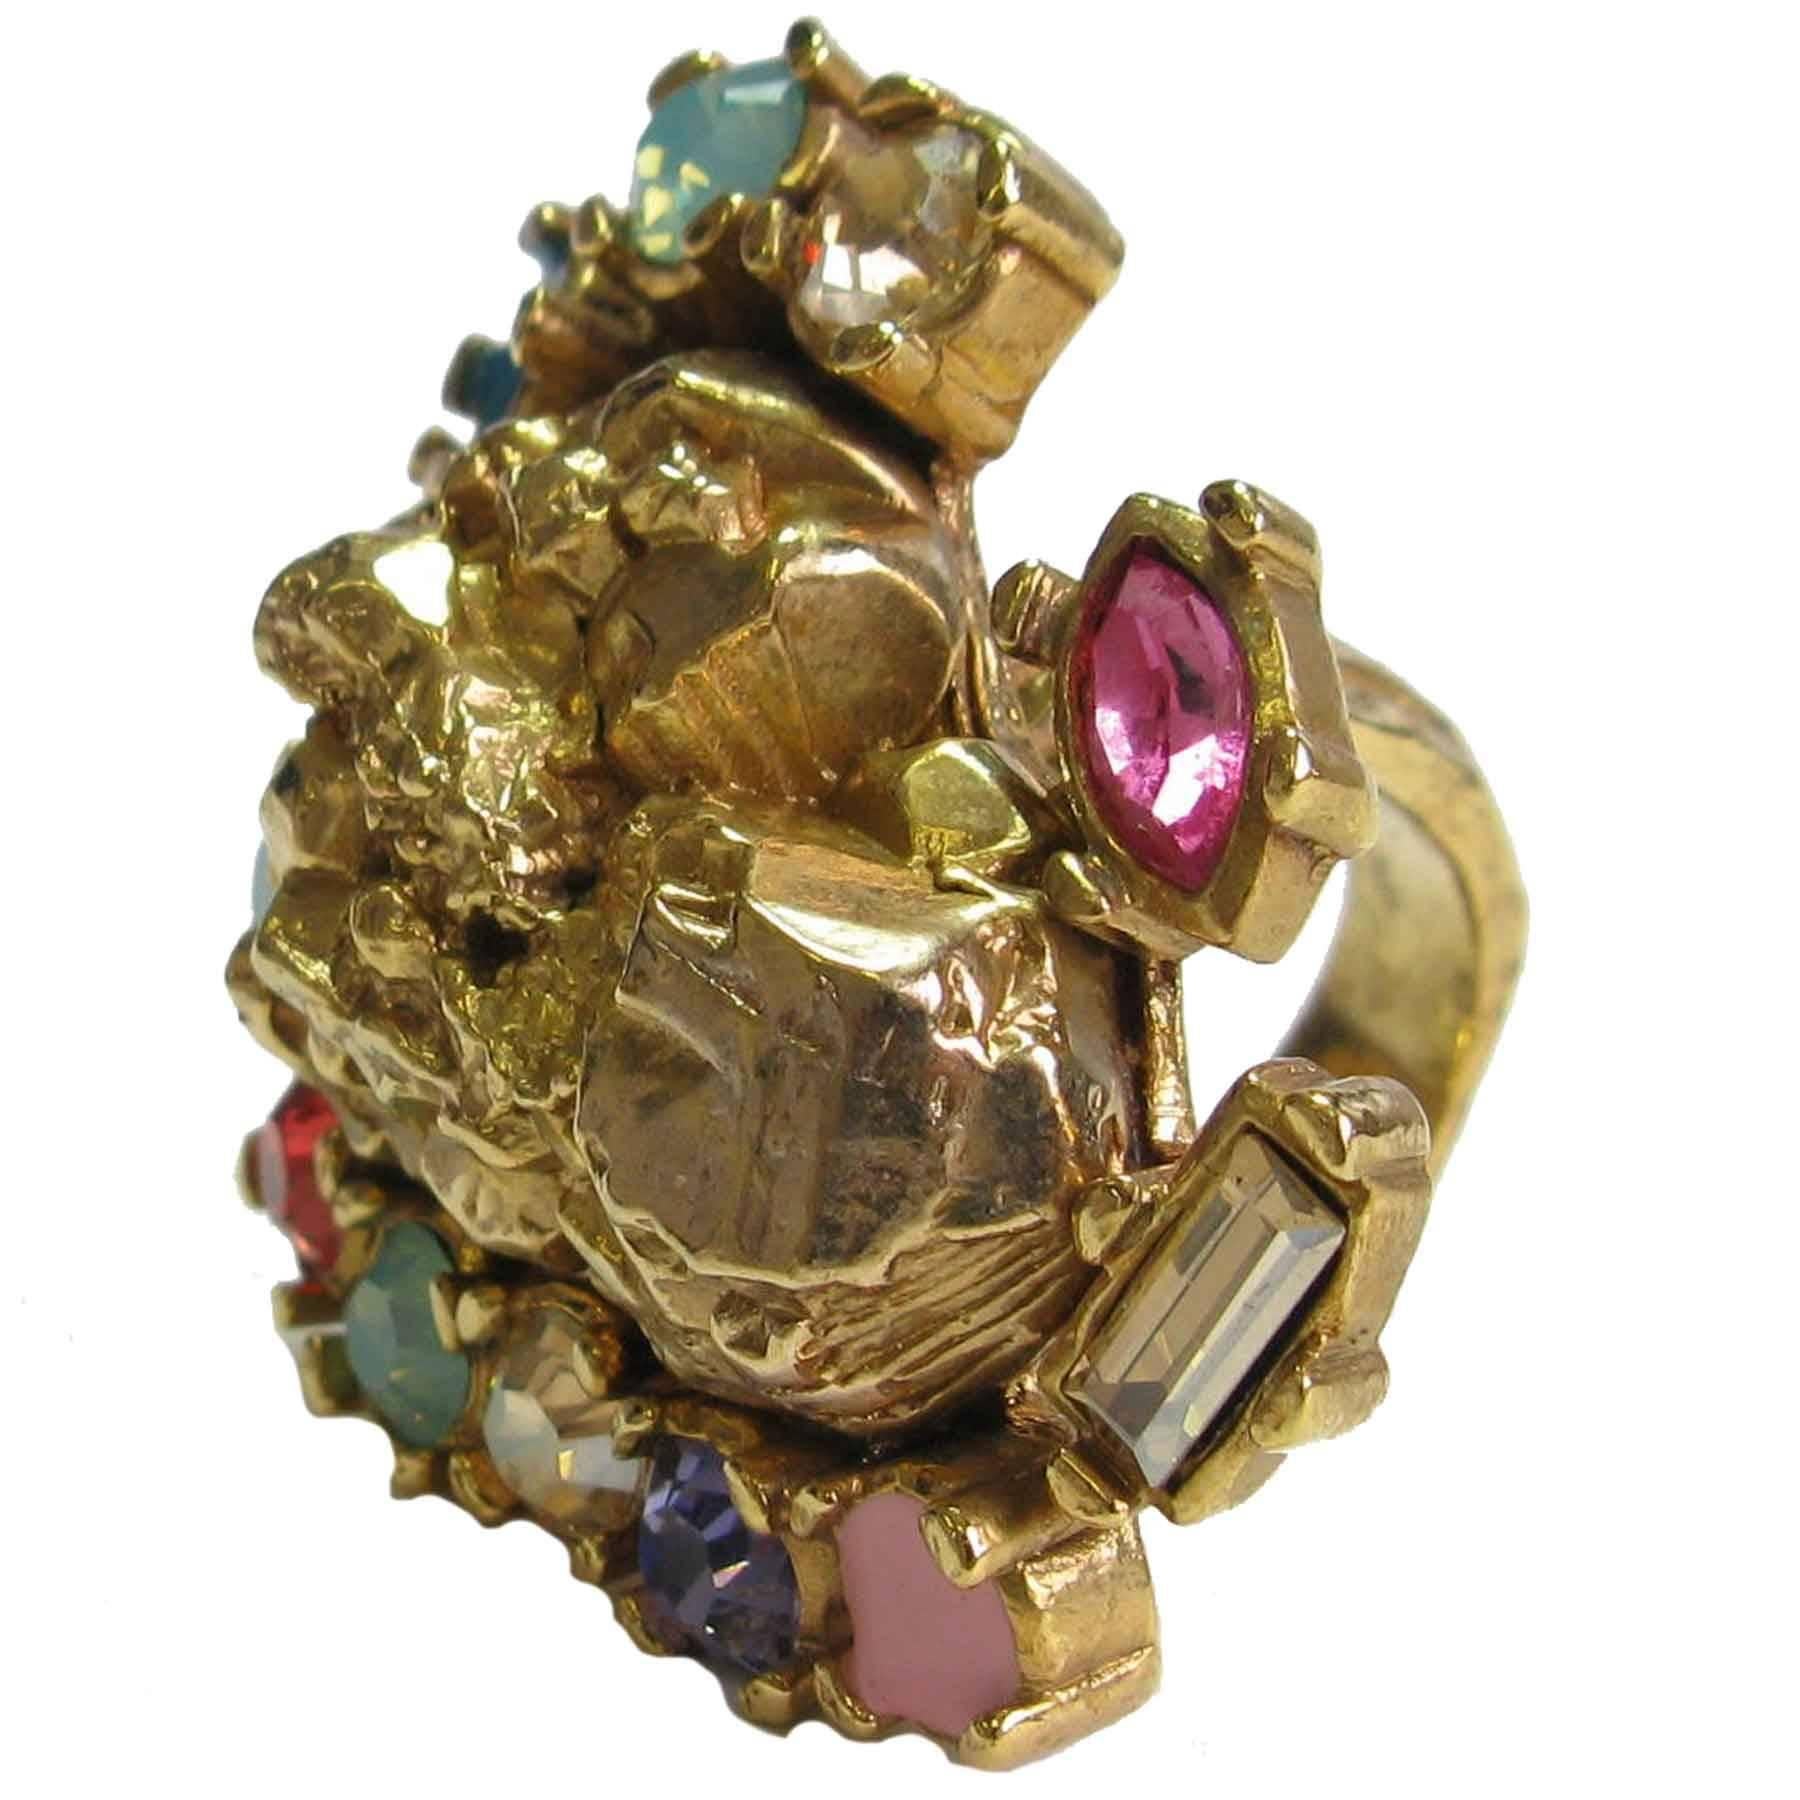 Women's YVES SAINT LAURENT Heart Ring in Gilded Metal and Multicolored Rhinestones S49EU